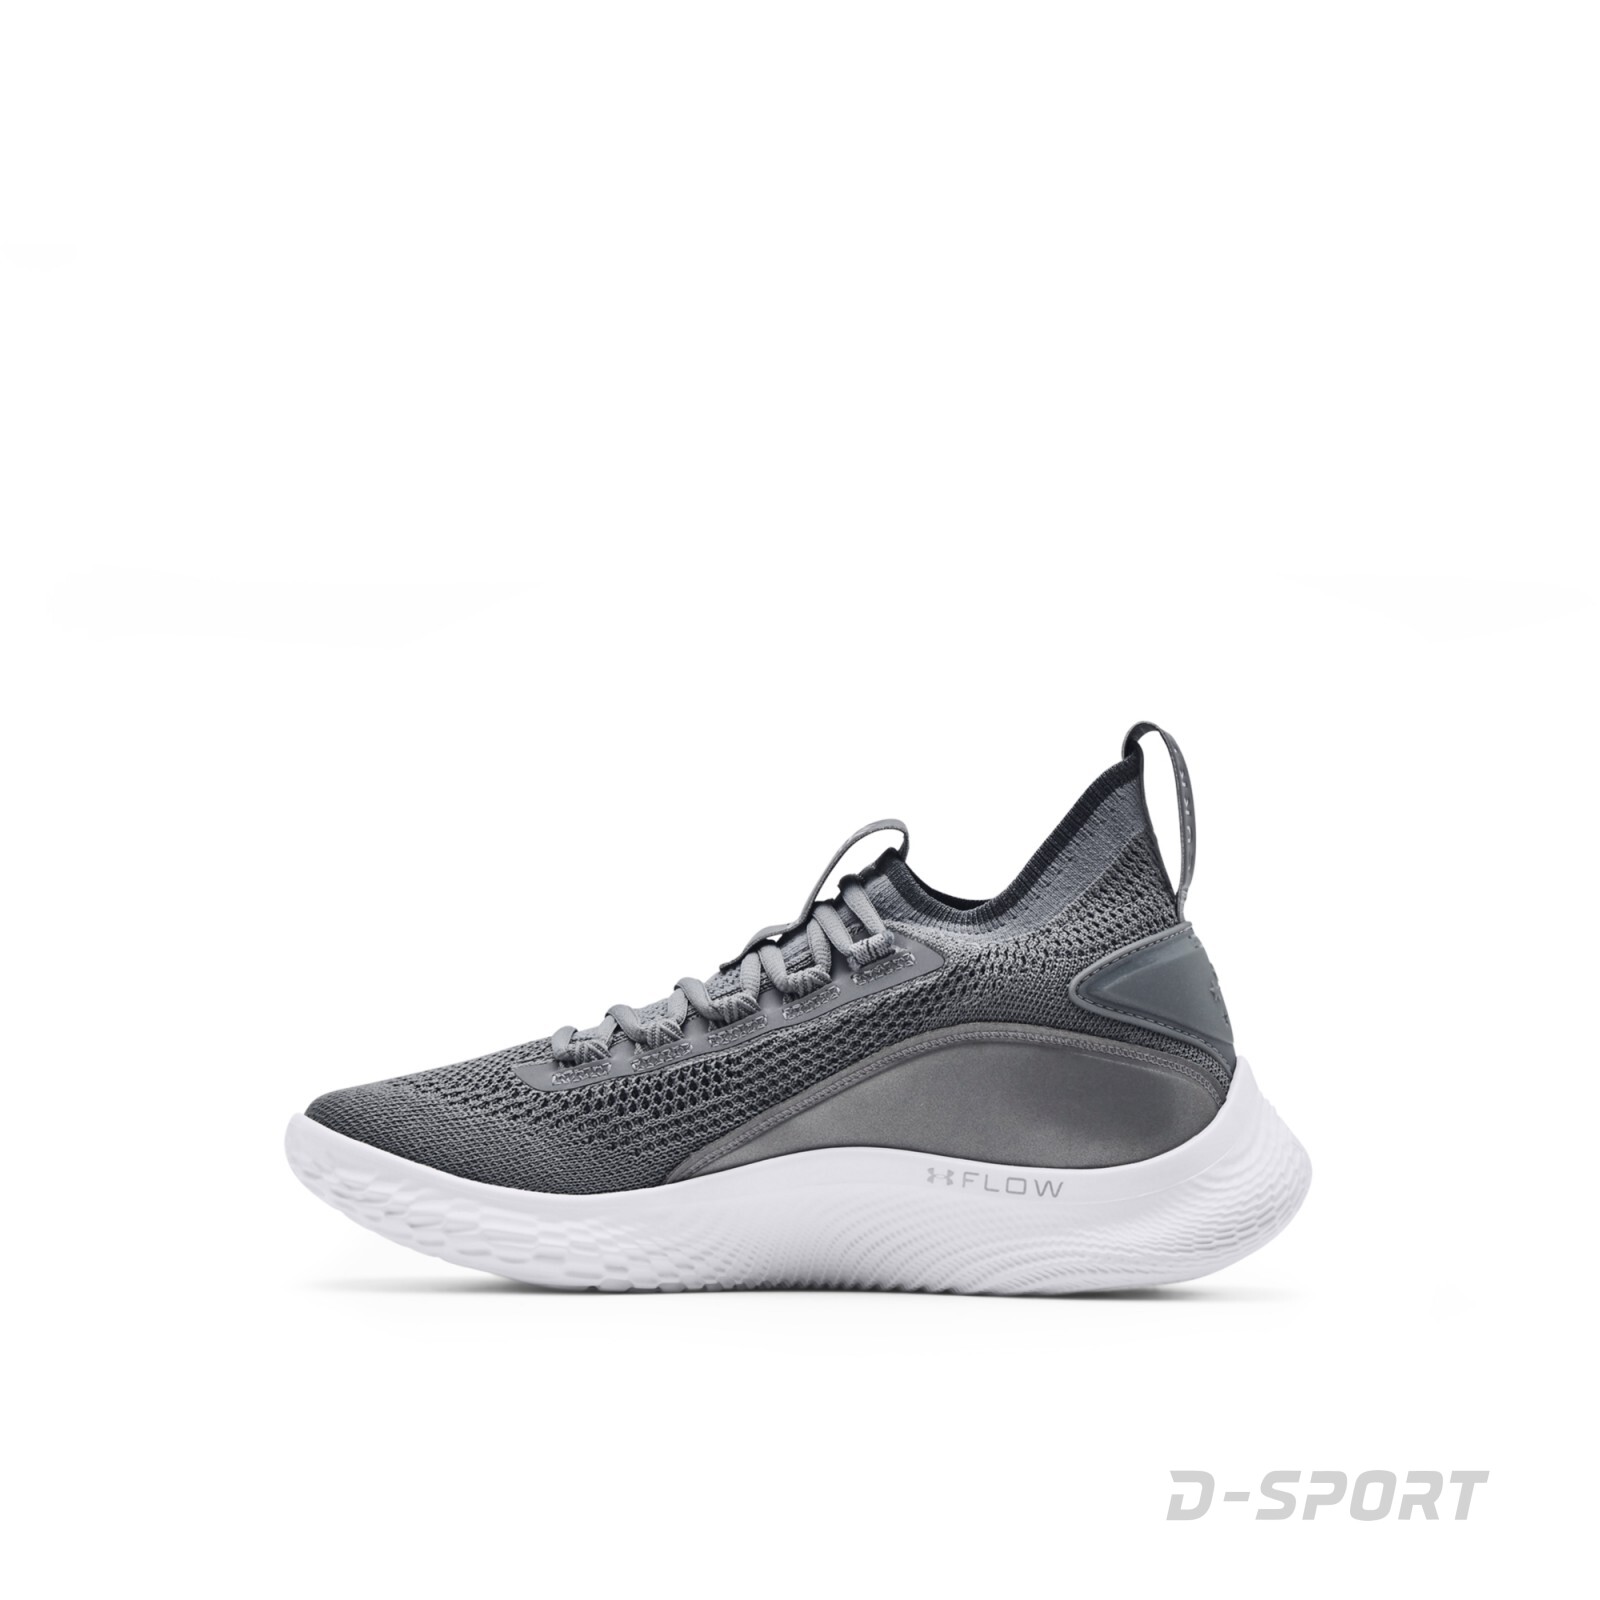 Under Armour CURRY 8 SHINE